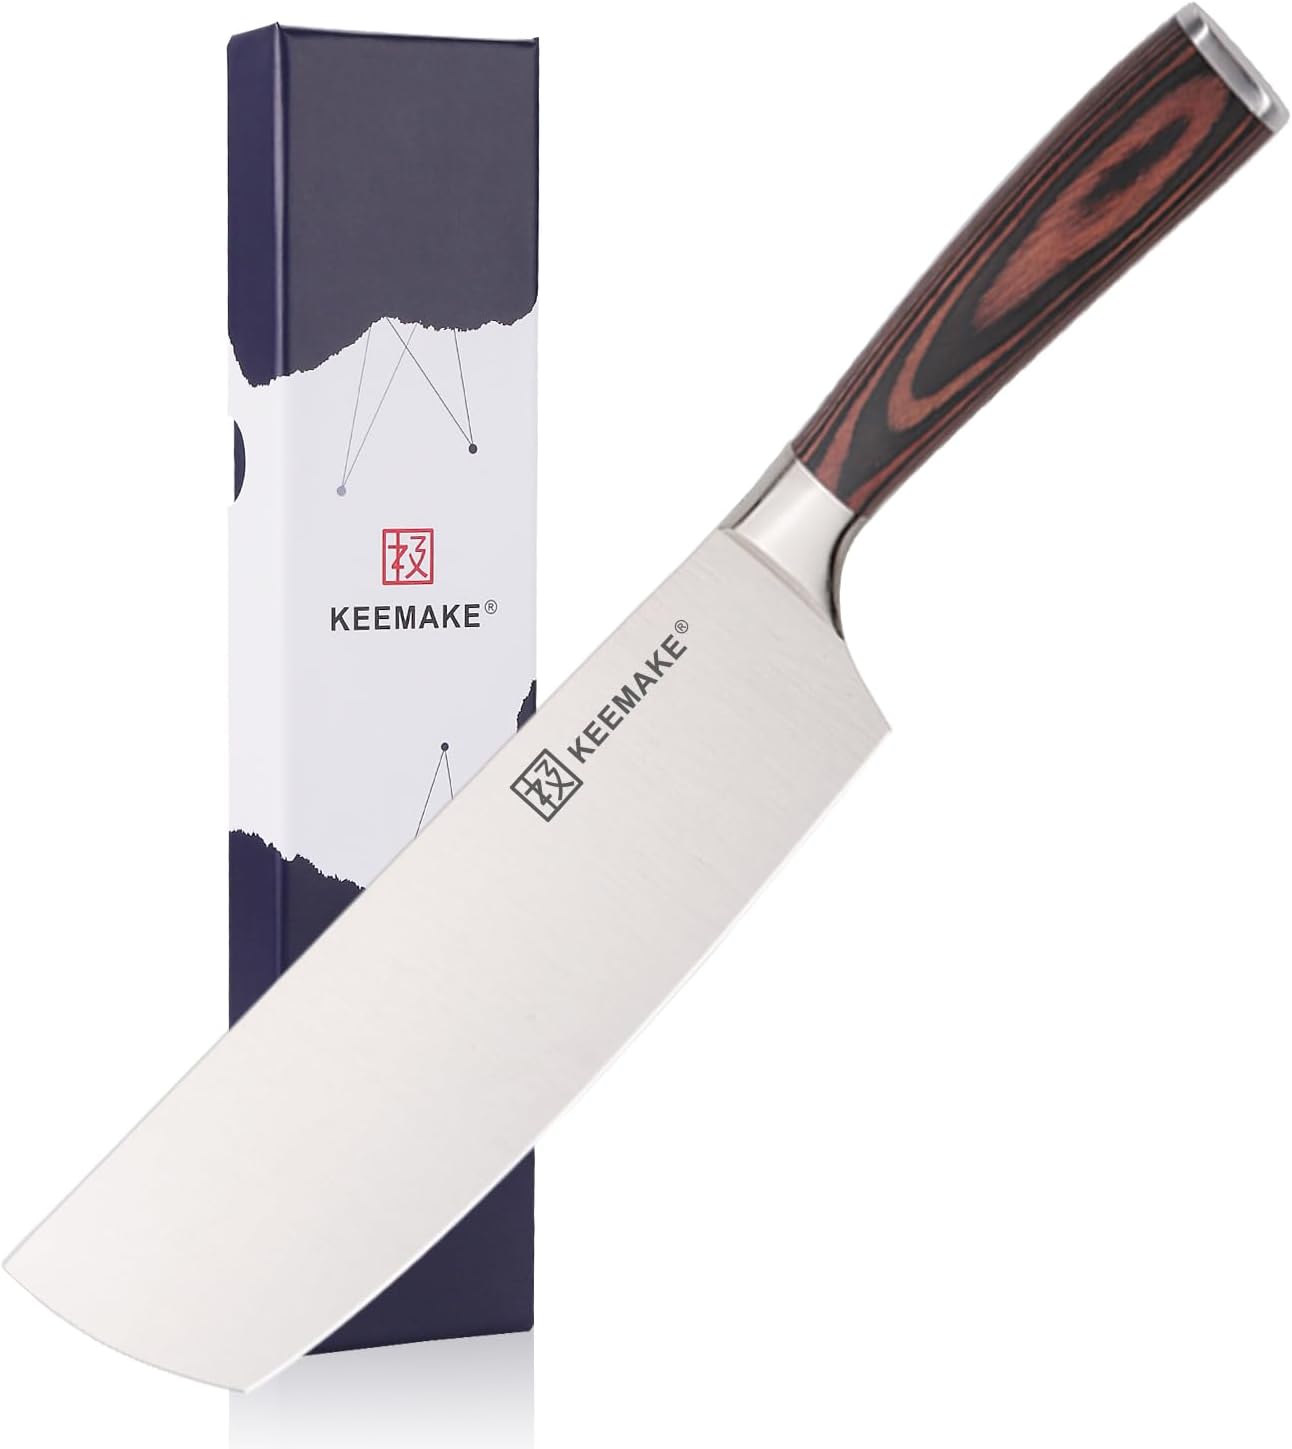 KEEMAKE Nakiri Knife 7 inch, Japanese Style Kitchen Knife with German High Carbon Stainless Steel 1.4116 Meat Knife